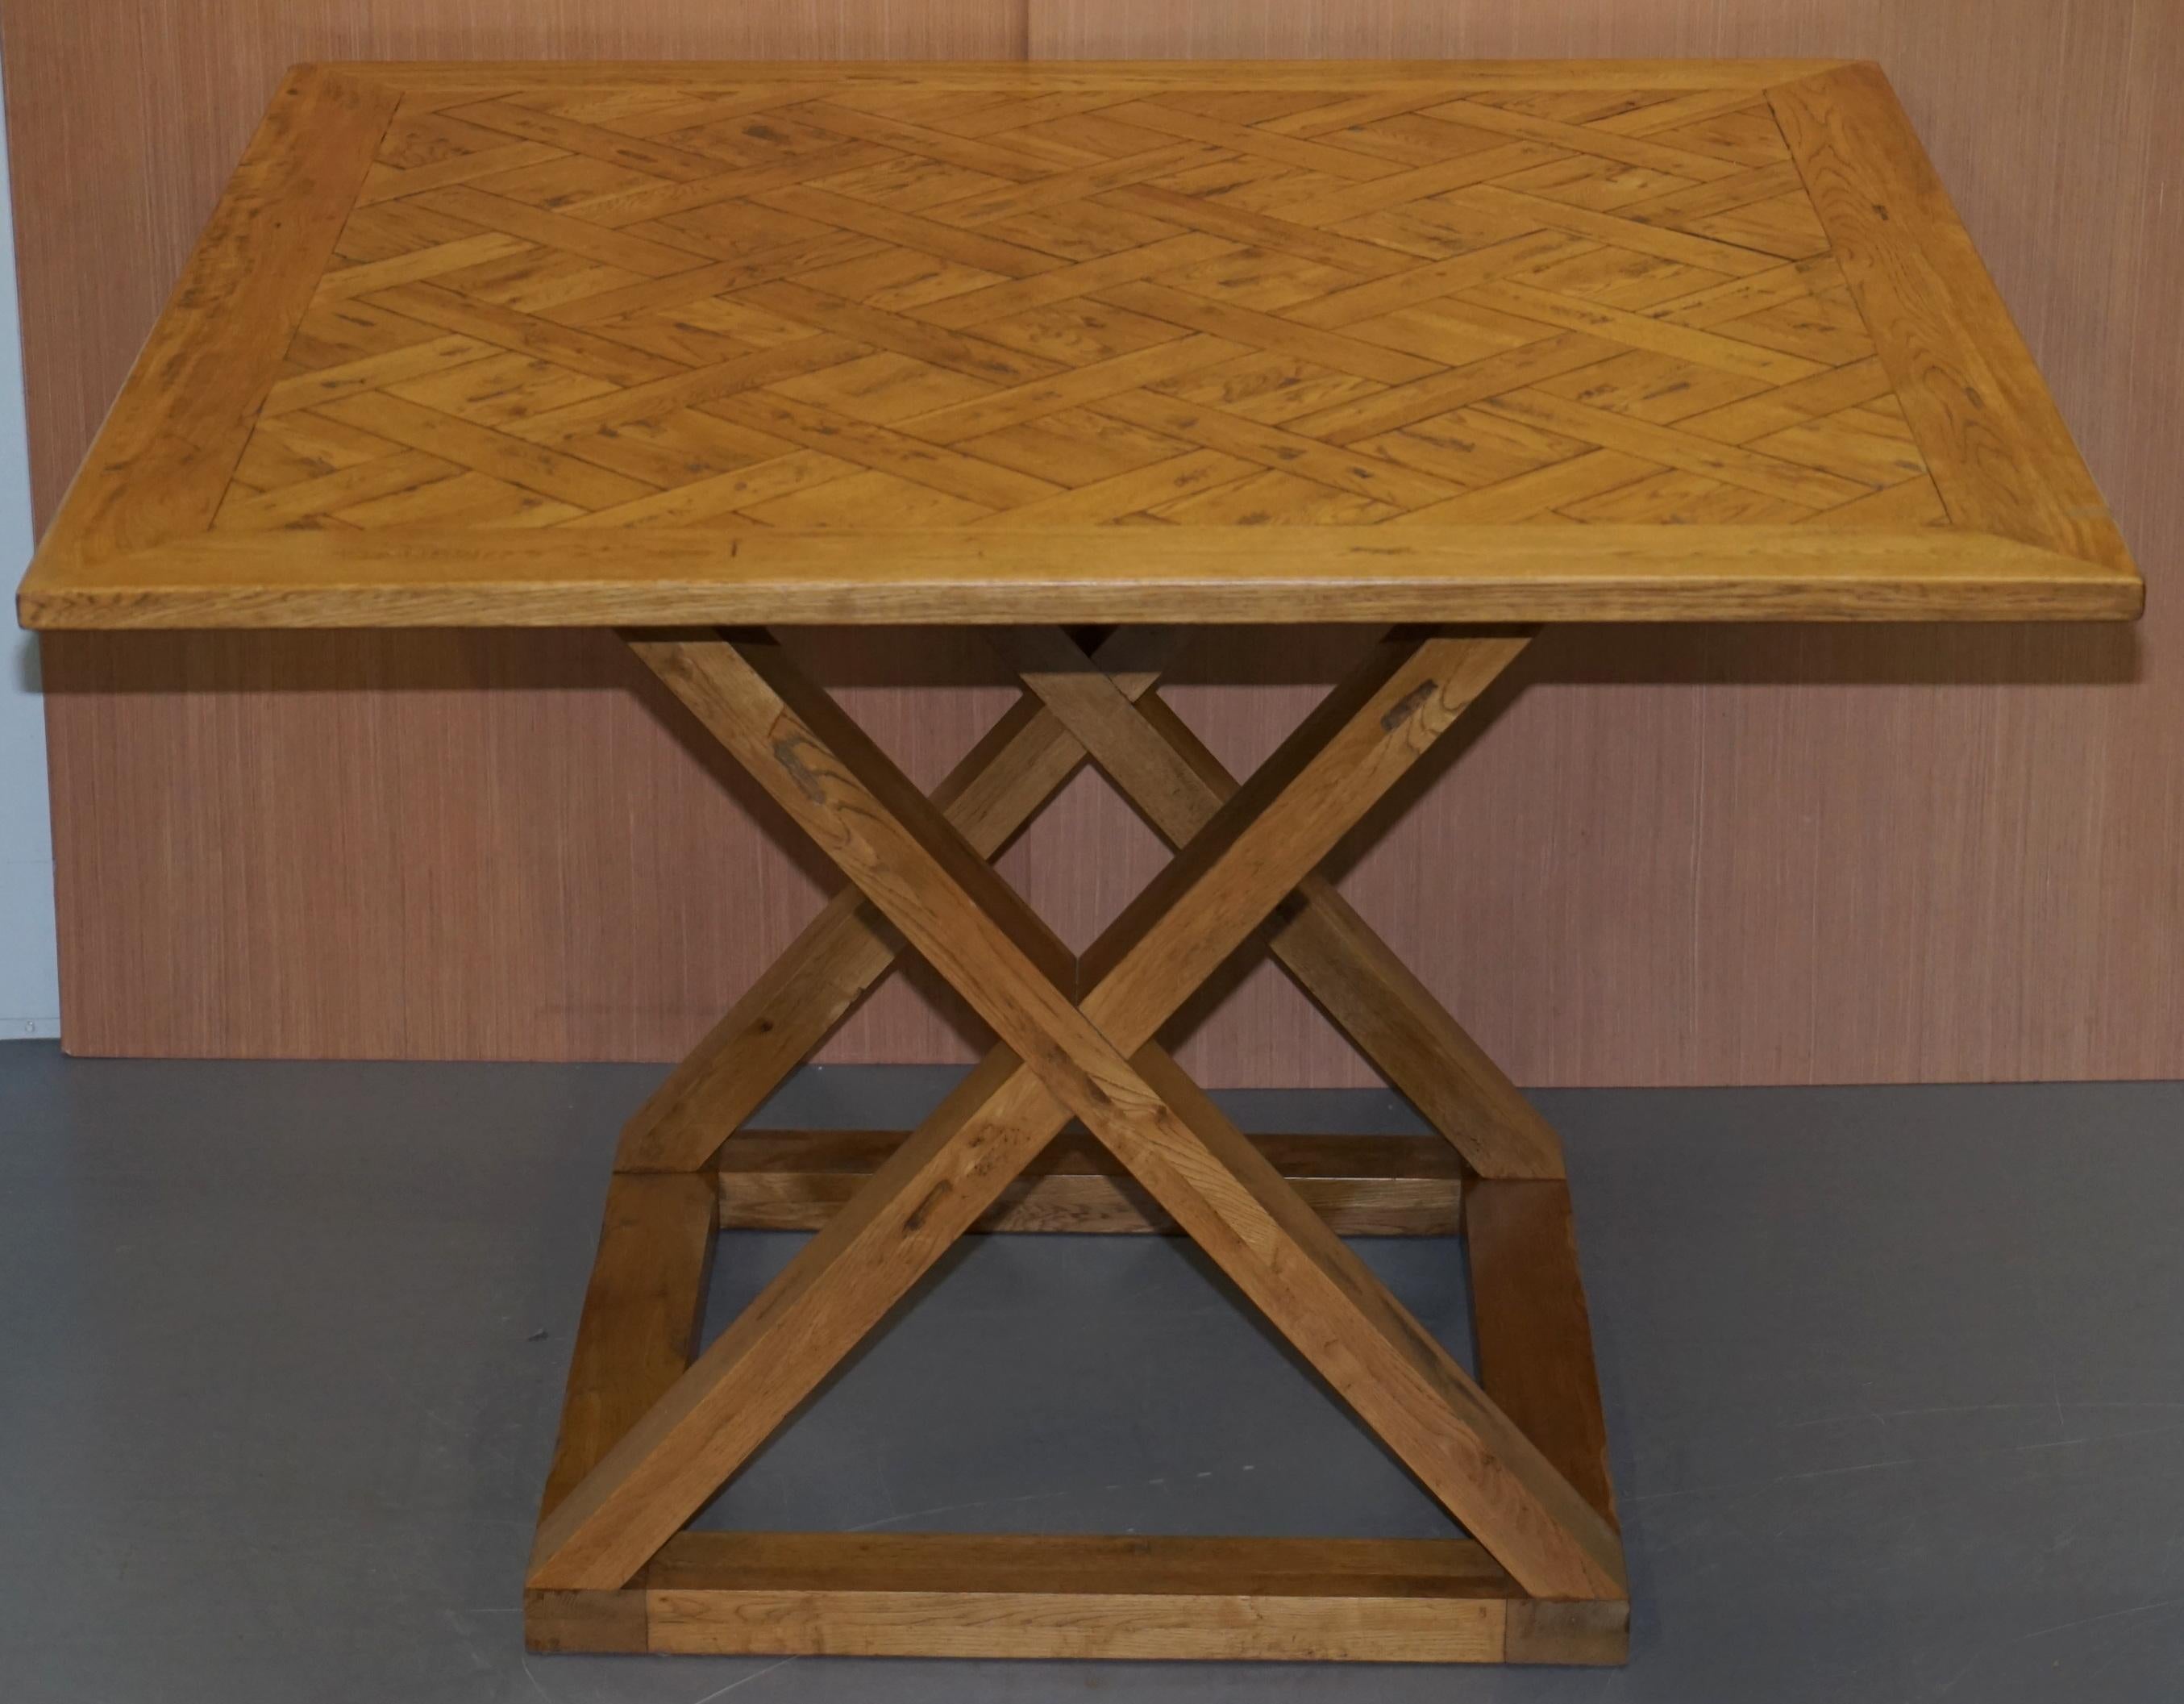 We are delighted to offer for sale this stunning 100% solid pegged oak Halo large high bar table to seat 8 – 12 people

I have the matching eight bar stools by Halo listed under my other items and another set of eight brown leather stools from